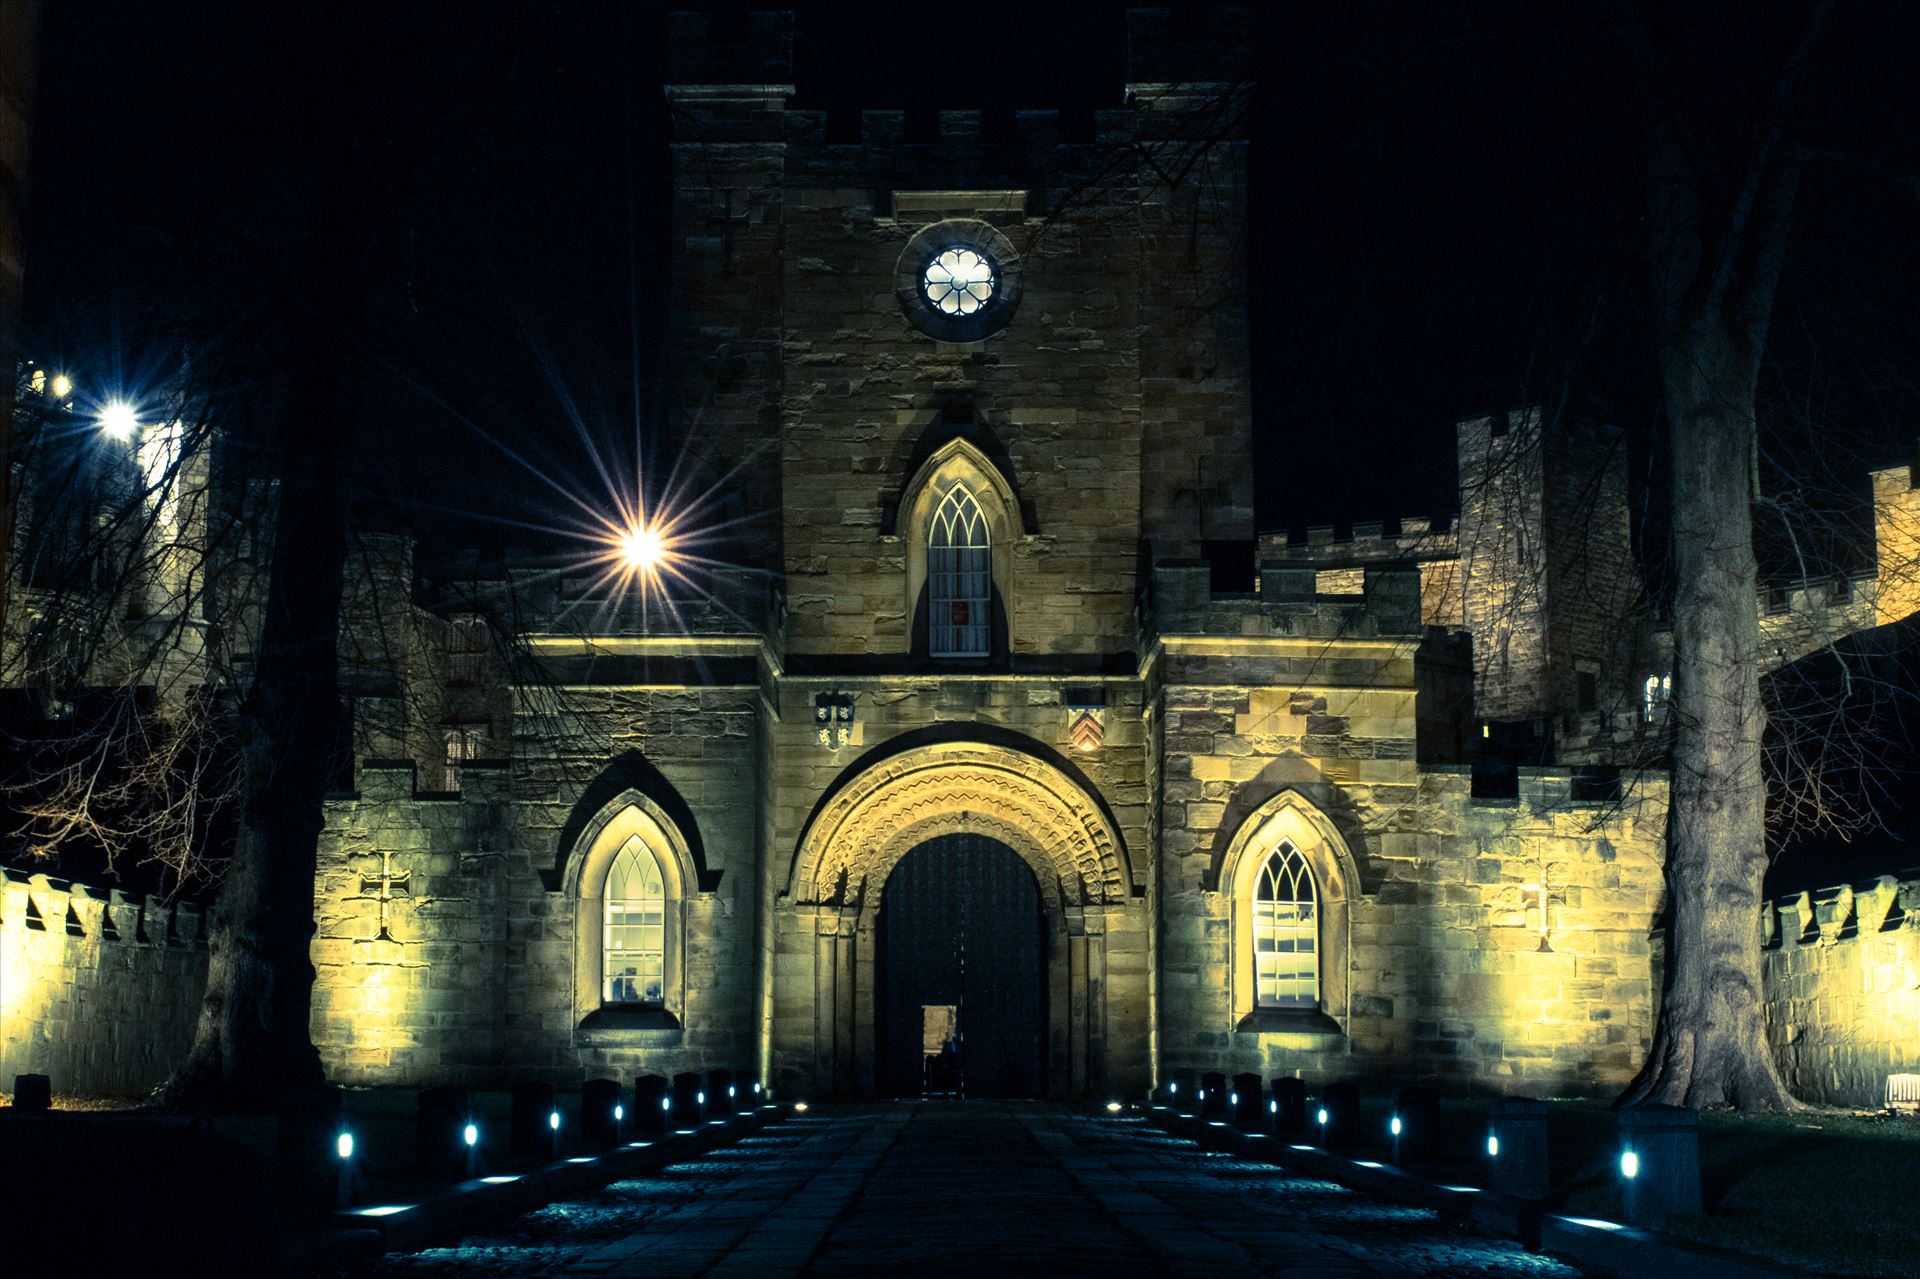 Durham City at Night Taken on a cold night shoot in Durham City by AJ Stoves Photography